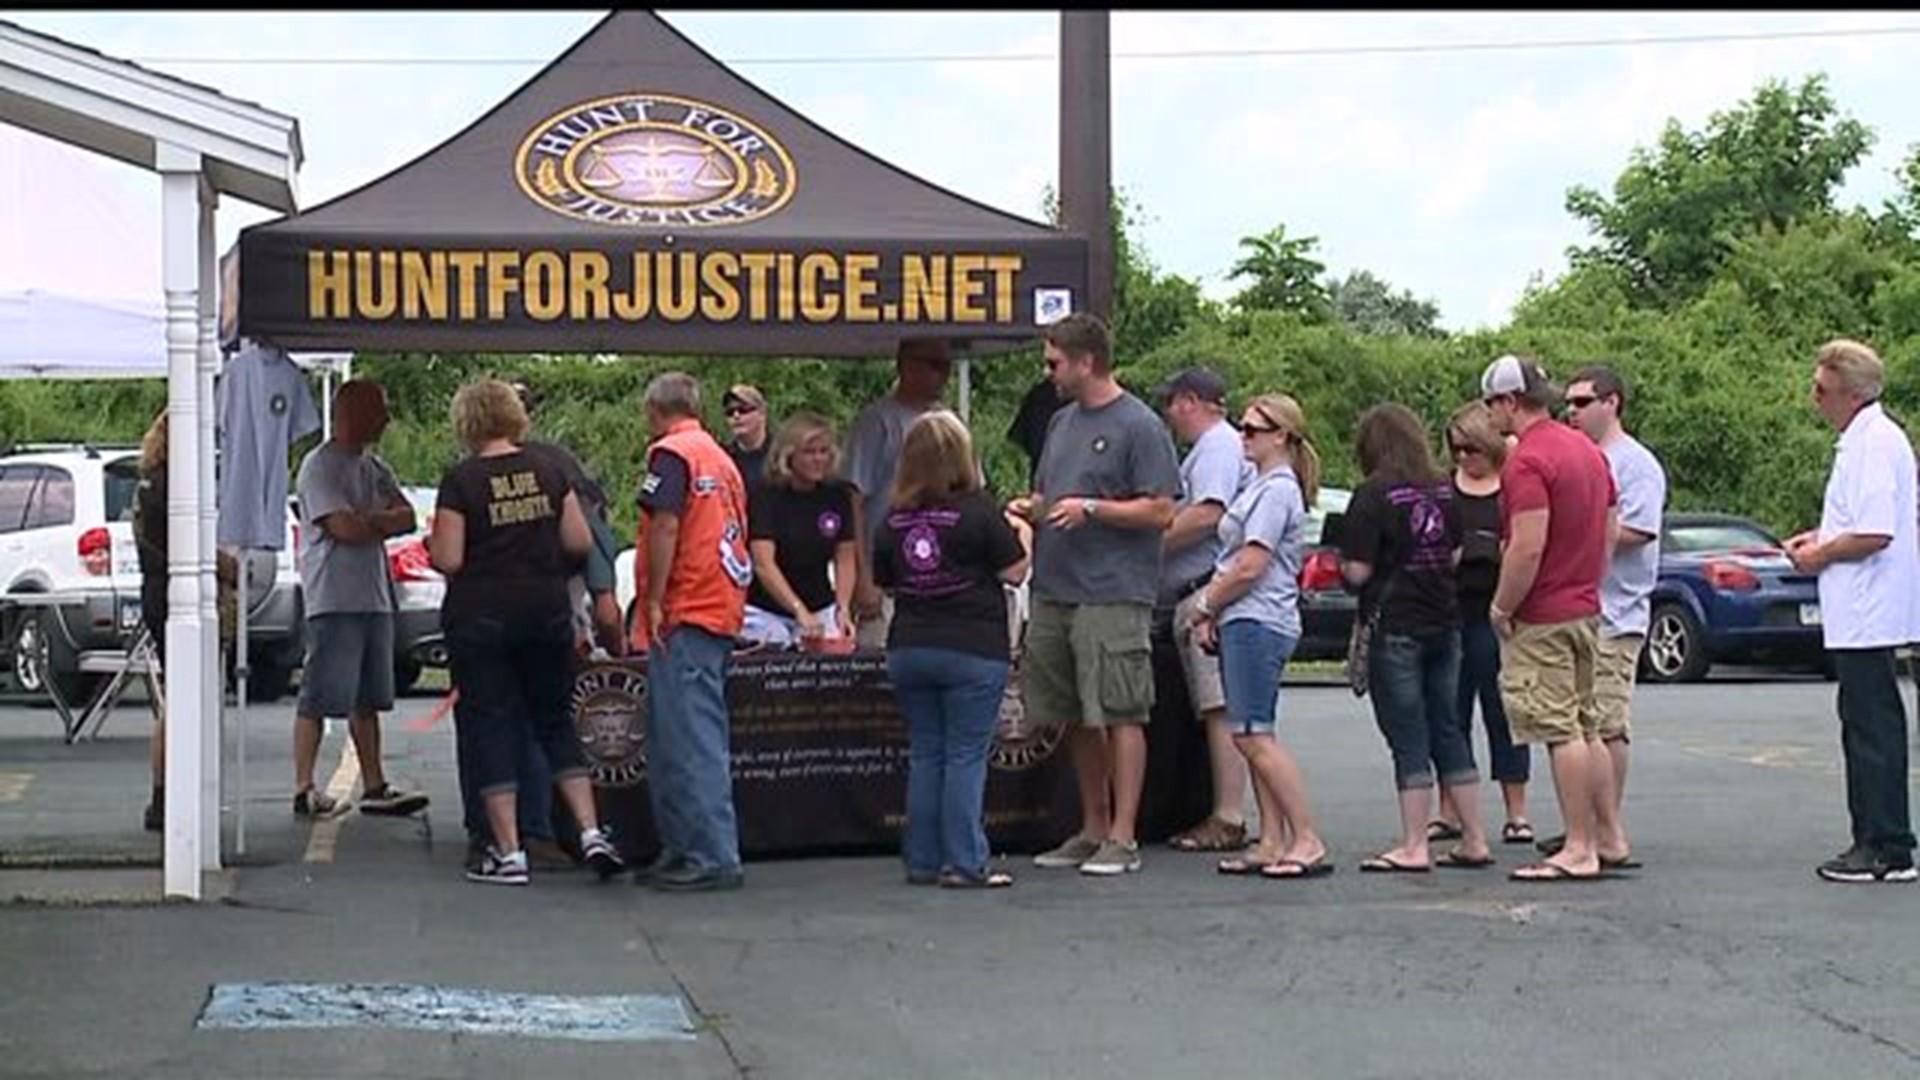 Some raise funds for cop accused of murder, while others protest